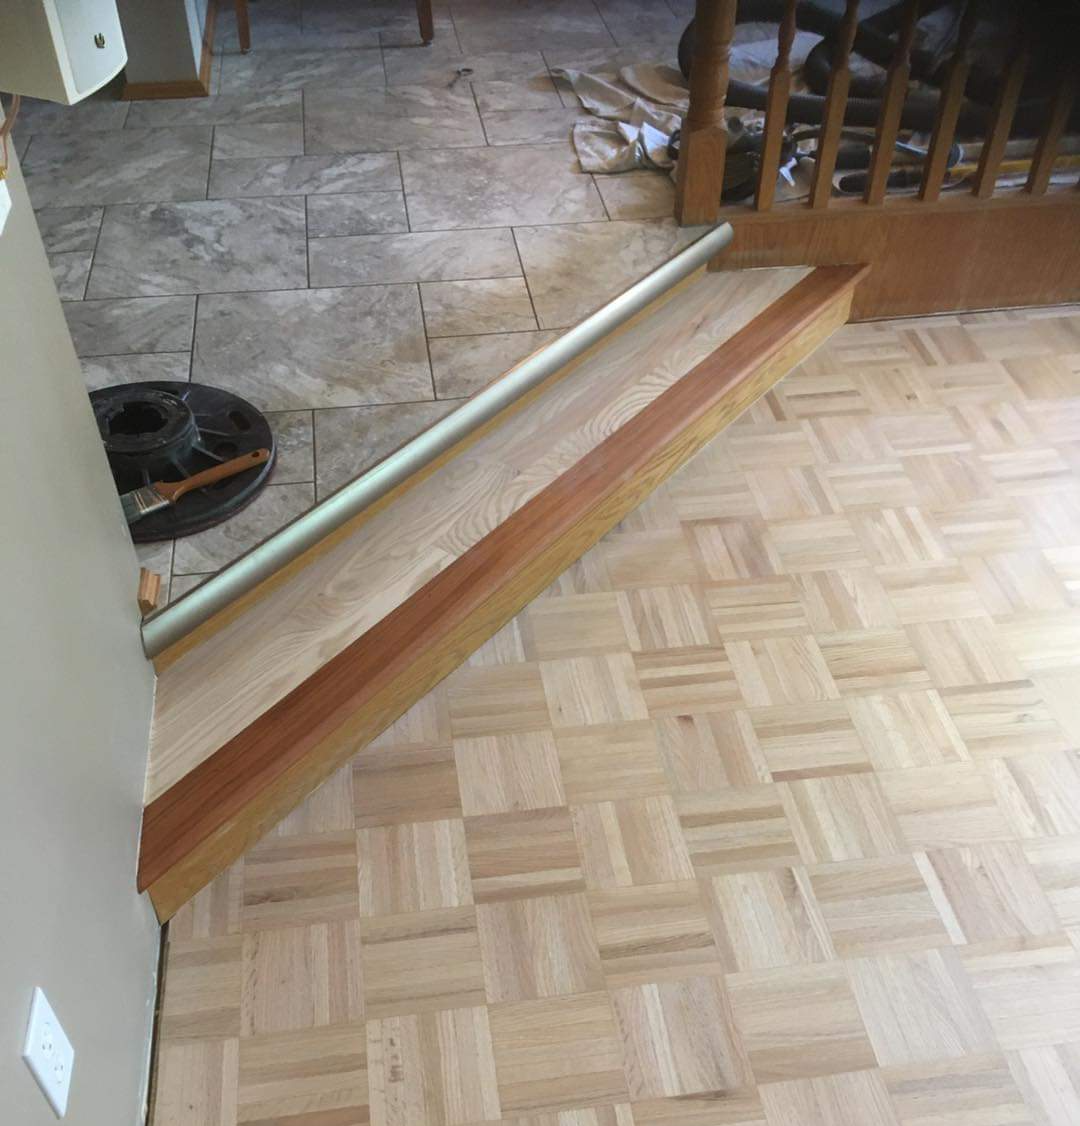 Another shot of this clean transition between tile and hardwood floor.